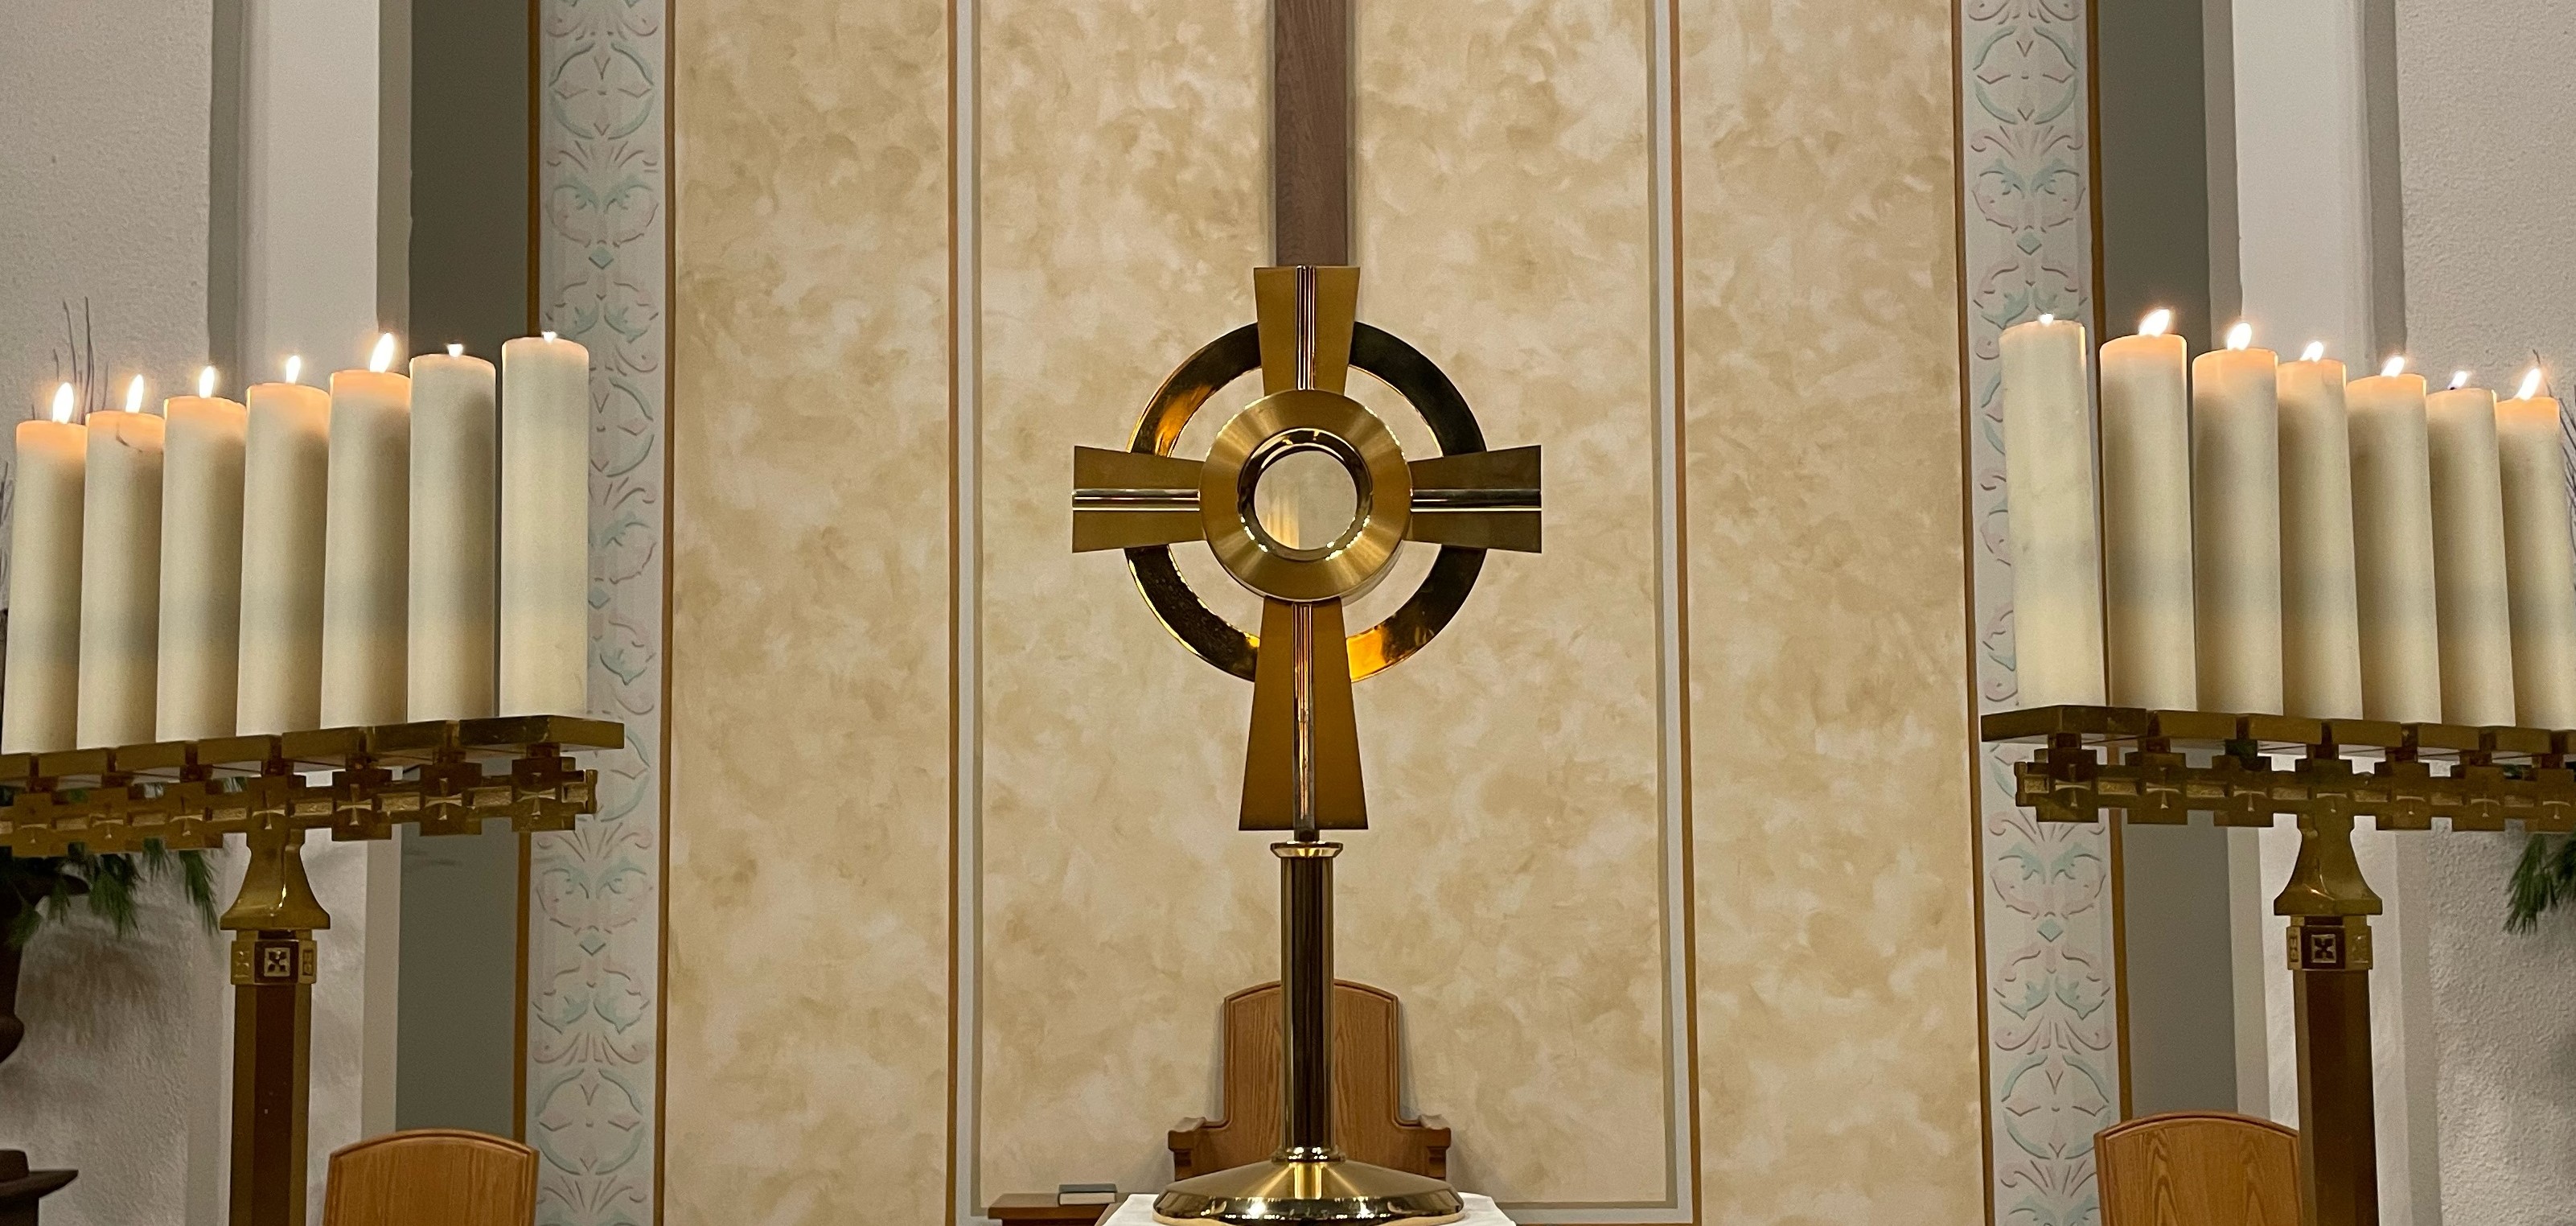 Picture of monstrance with Eucharist flanked by candelabras on both sides